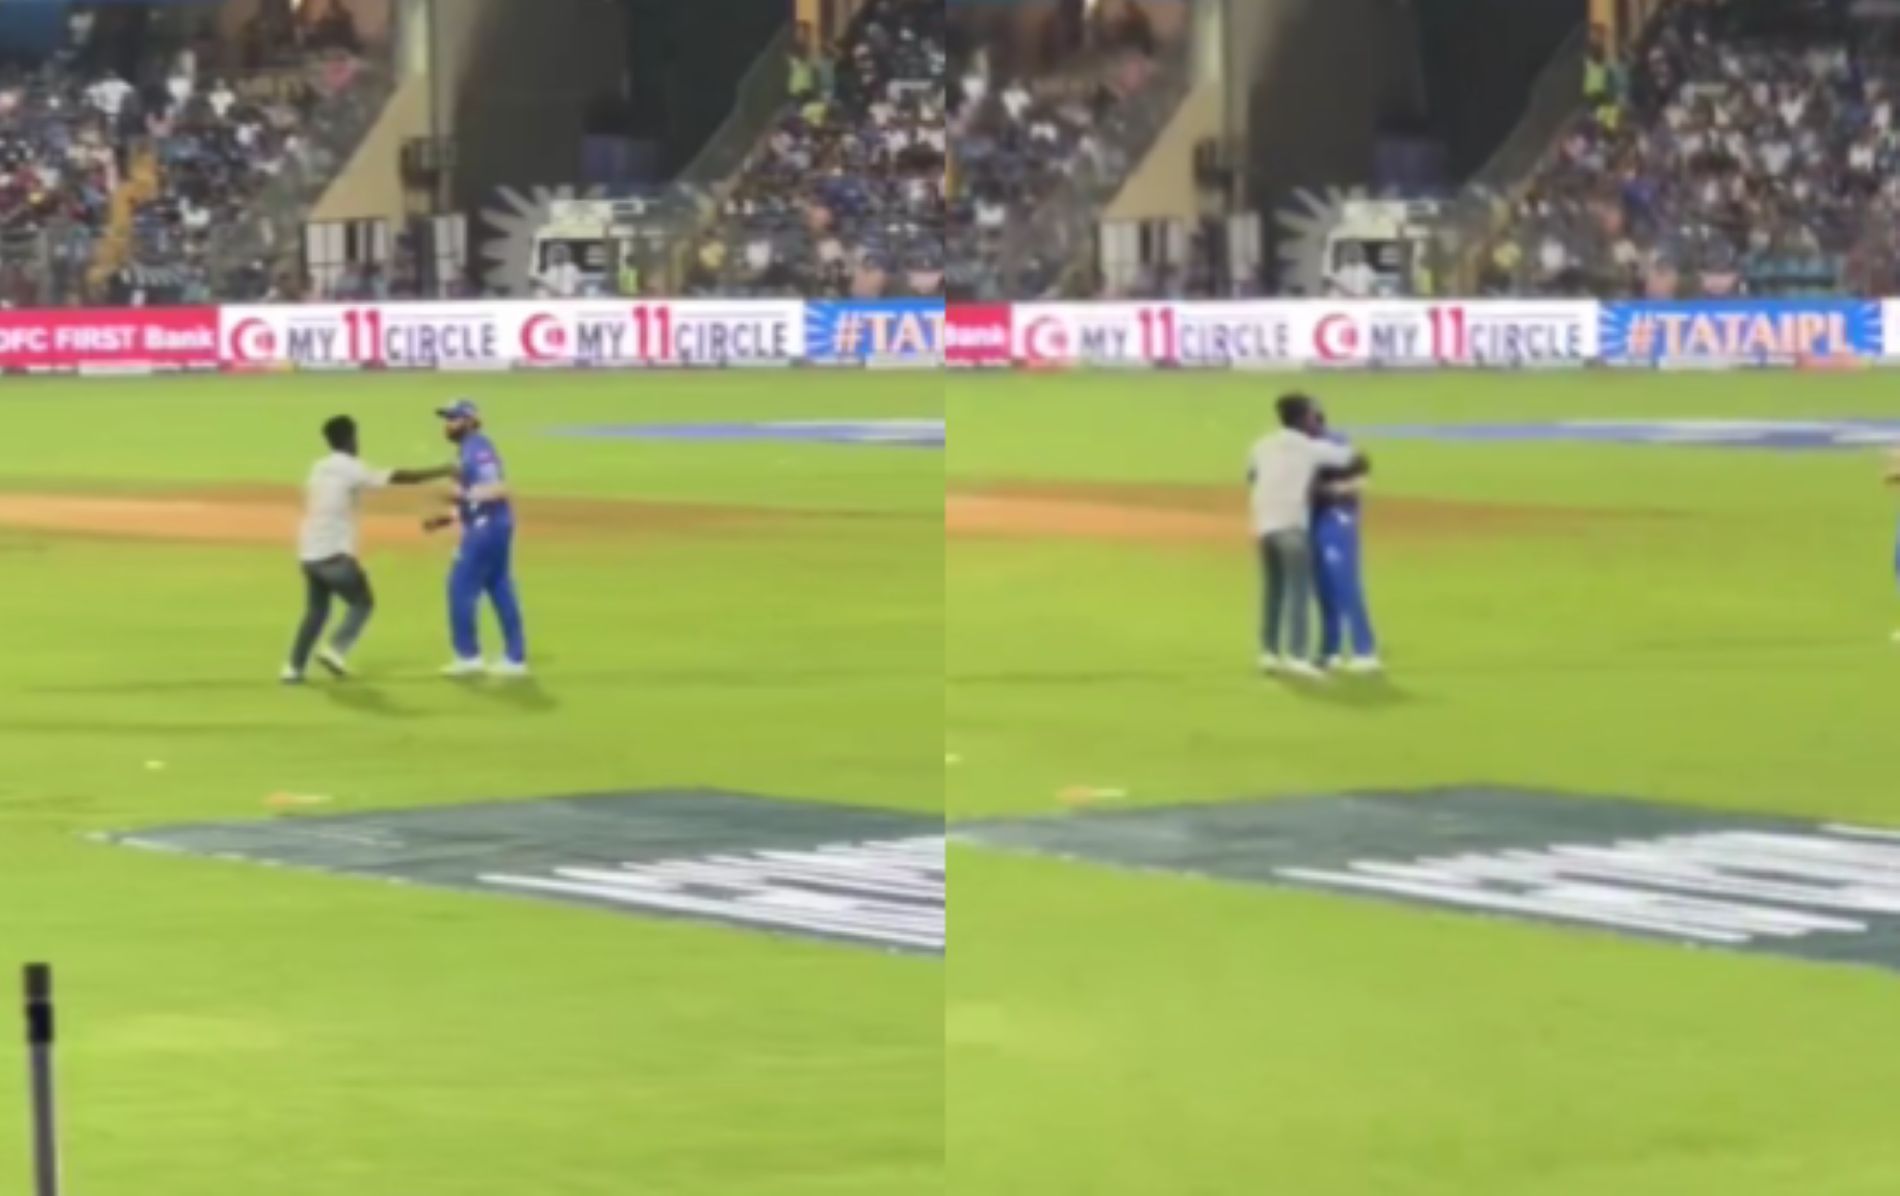 Rohit was busy setting the field when a fan invaded the pitch at the Wankhede Stadium [Credit: Fan Twitter handle]